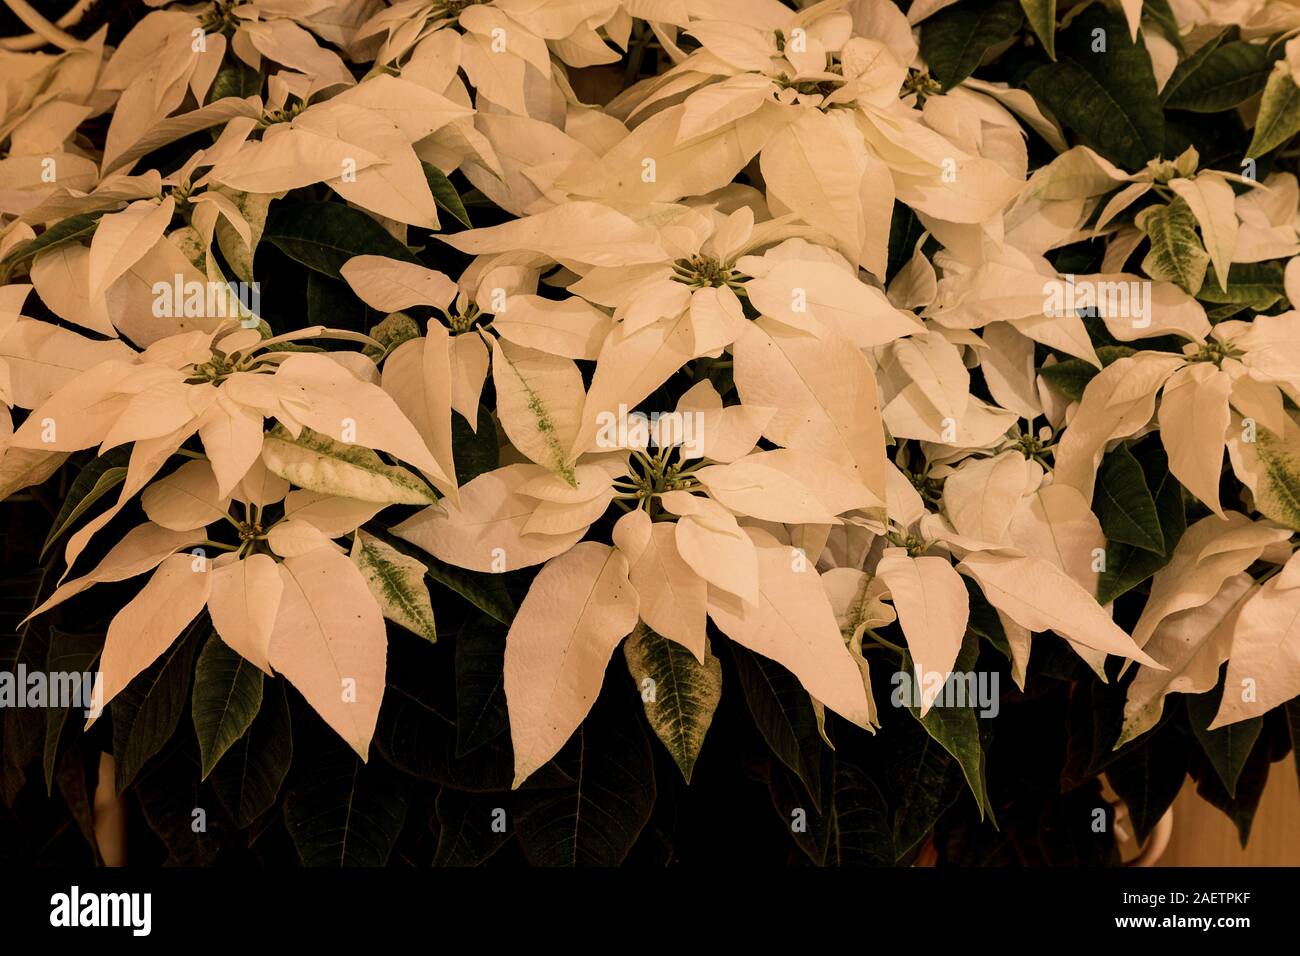 White poinsettia flower background of plants clustered together at Christmas Stock Photo